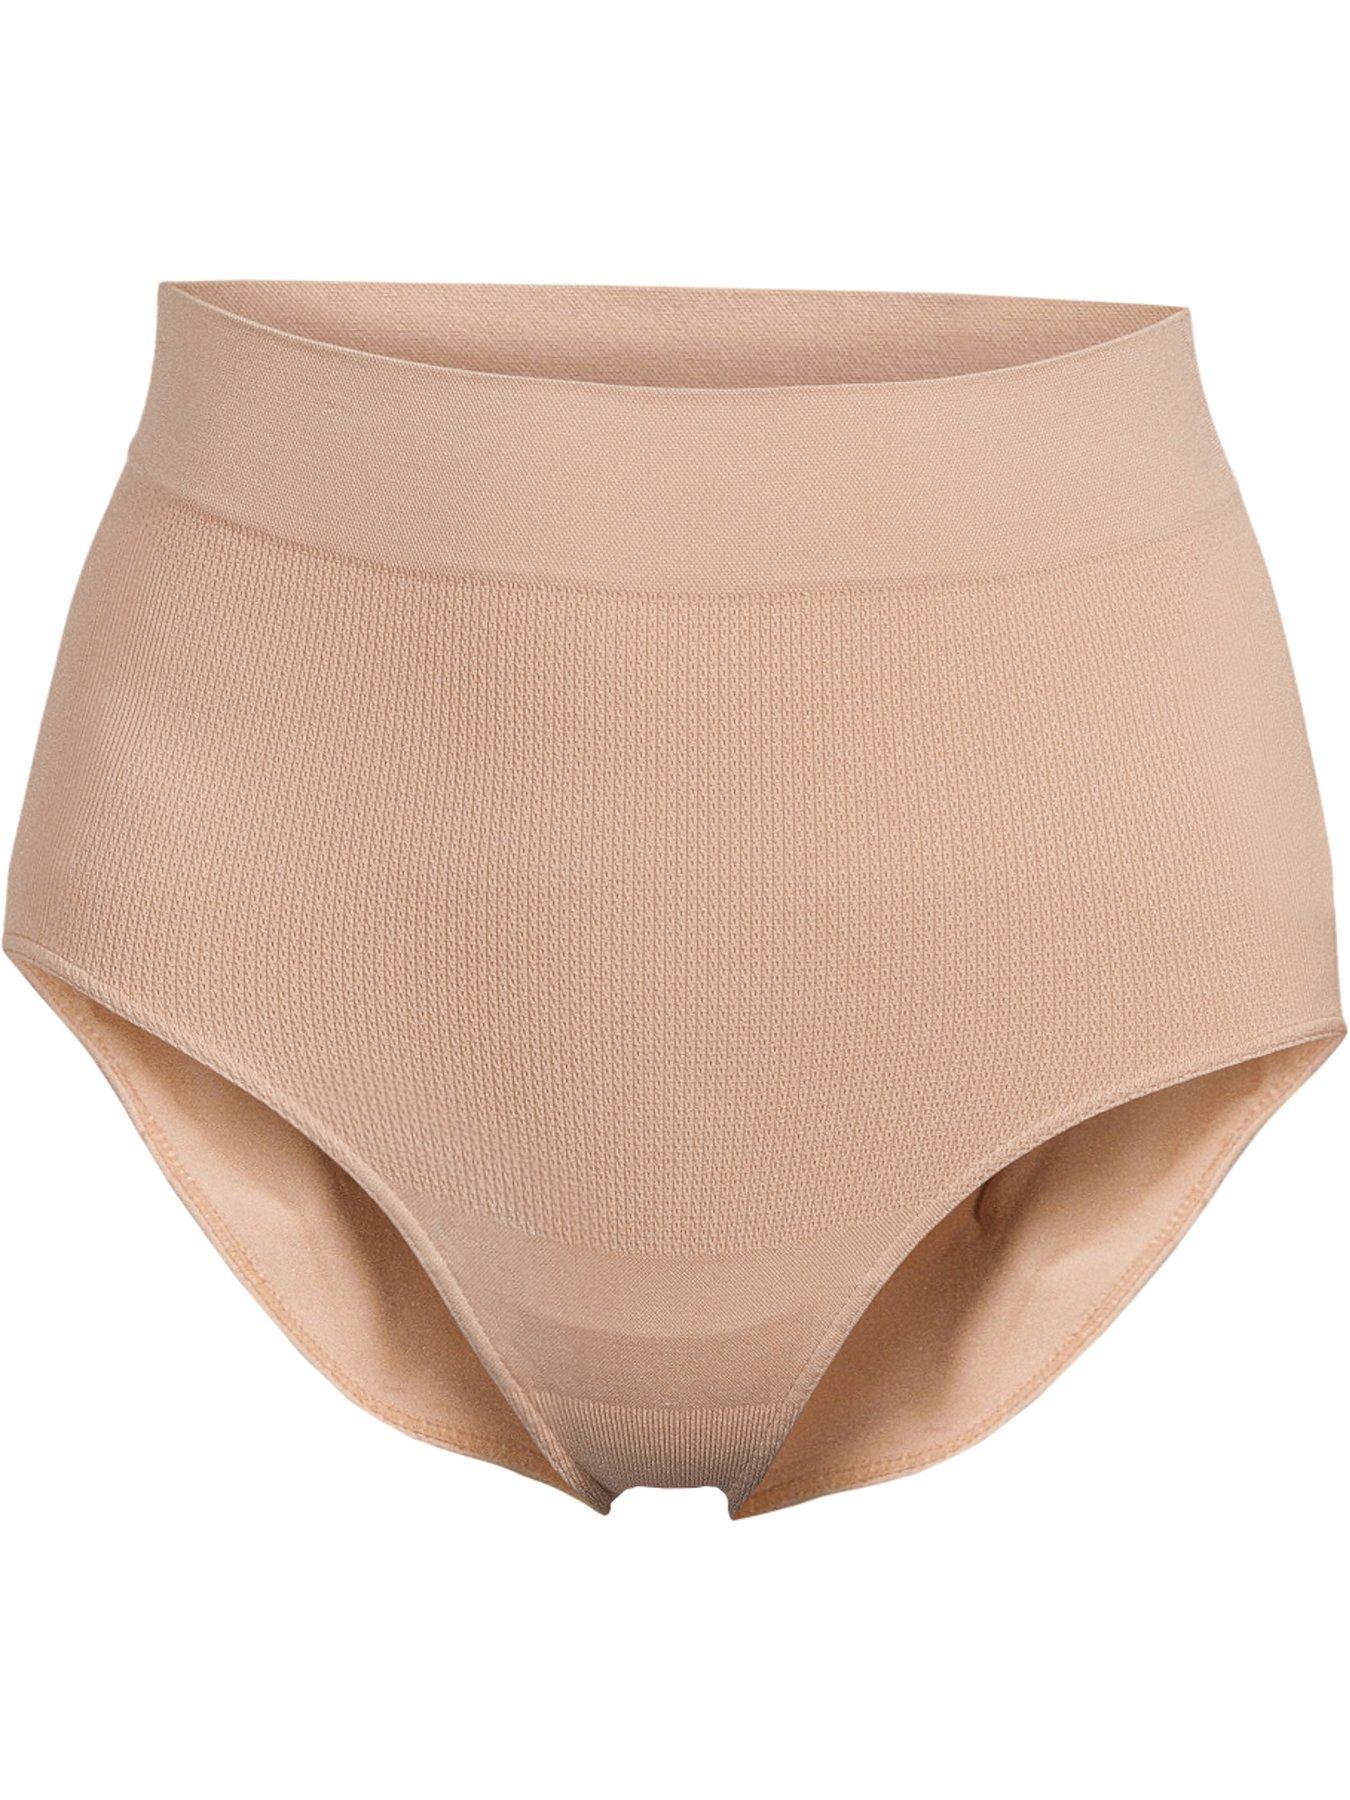 Spanx Everyday Shaping Brief - Underwear from  UK